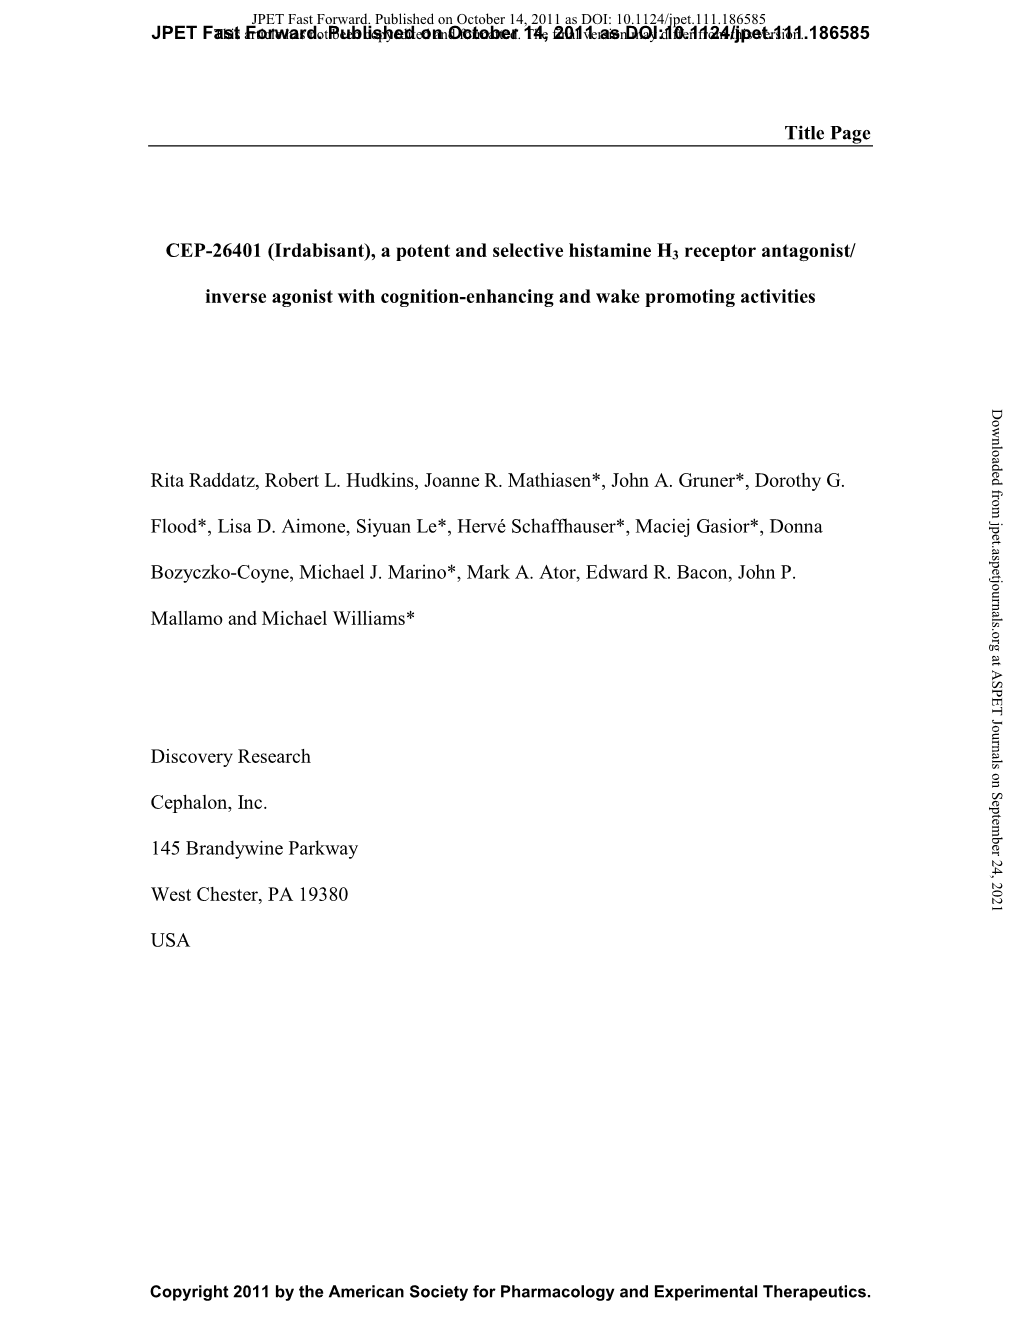 Title Page CEP-26401 (Irdabisant), a Potent and Selective Histamine H3 Receptor Antagonist/ Inverse Agonist with Cognition-Enhan